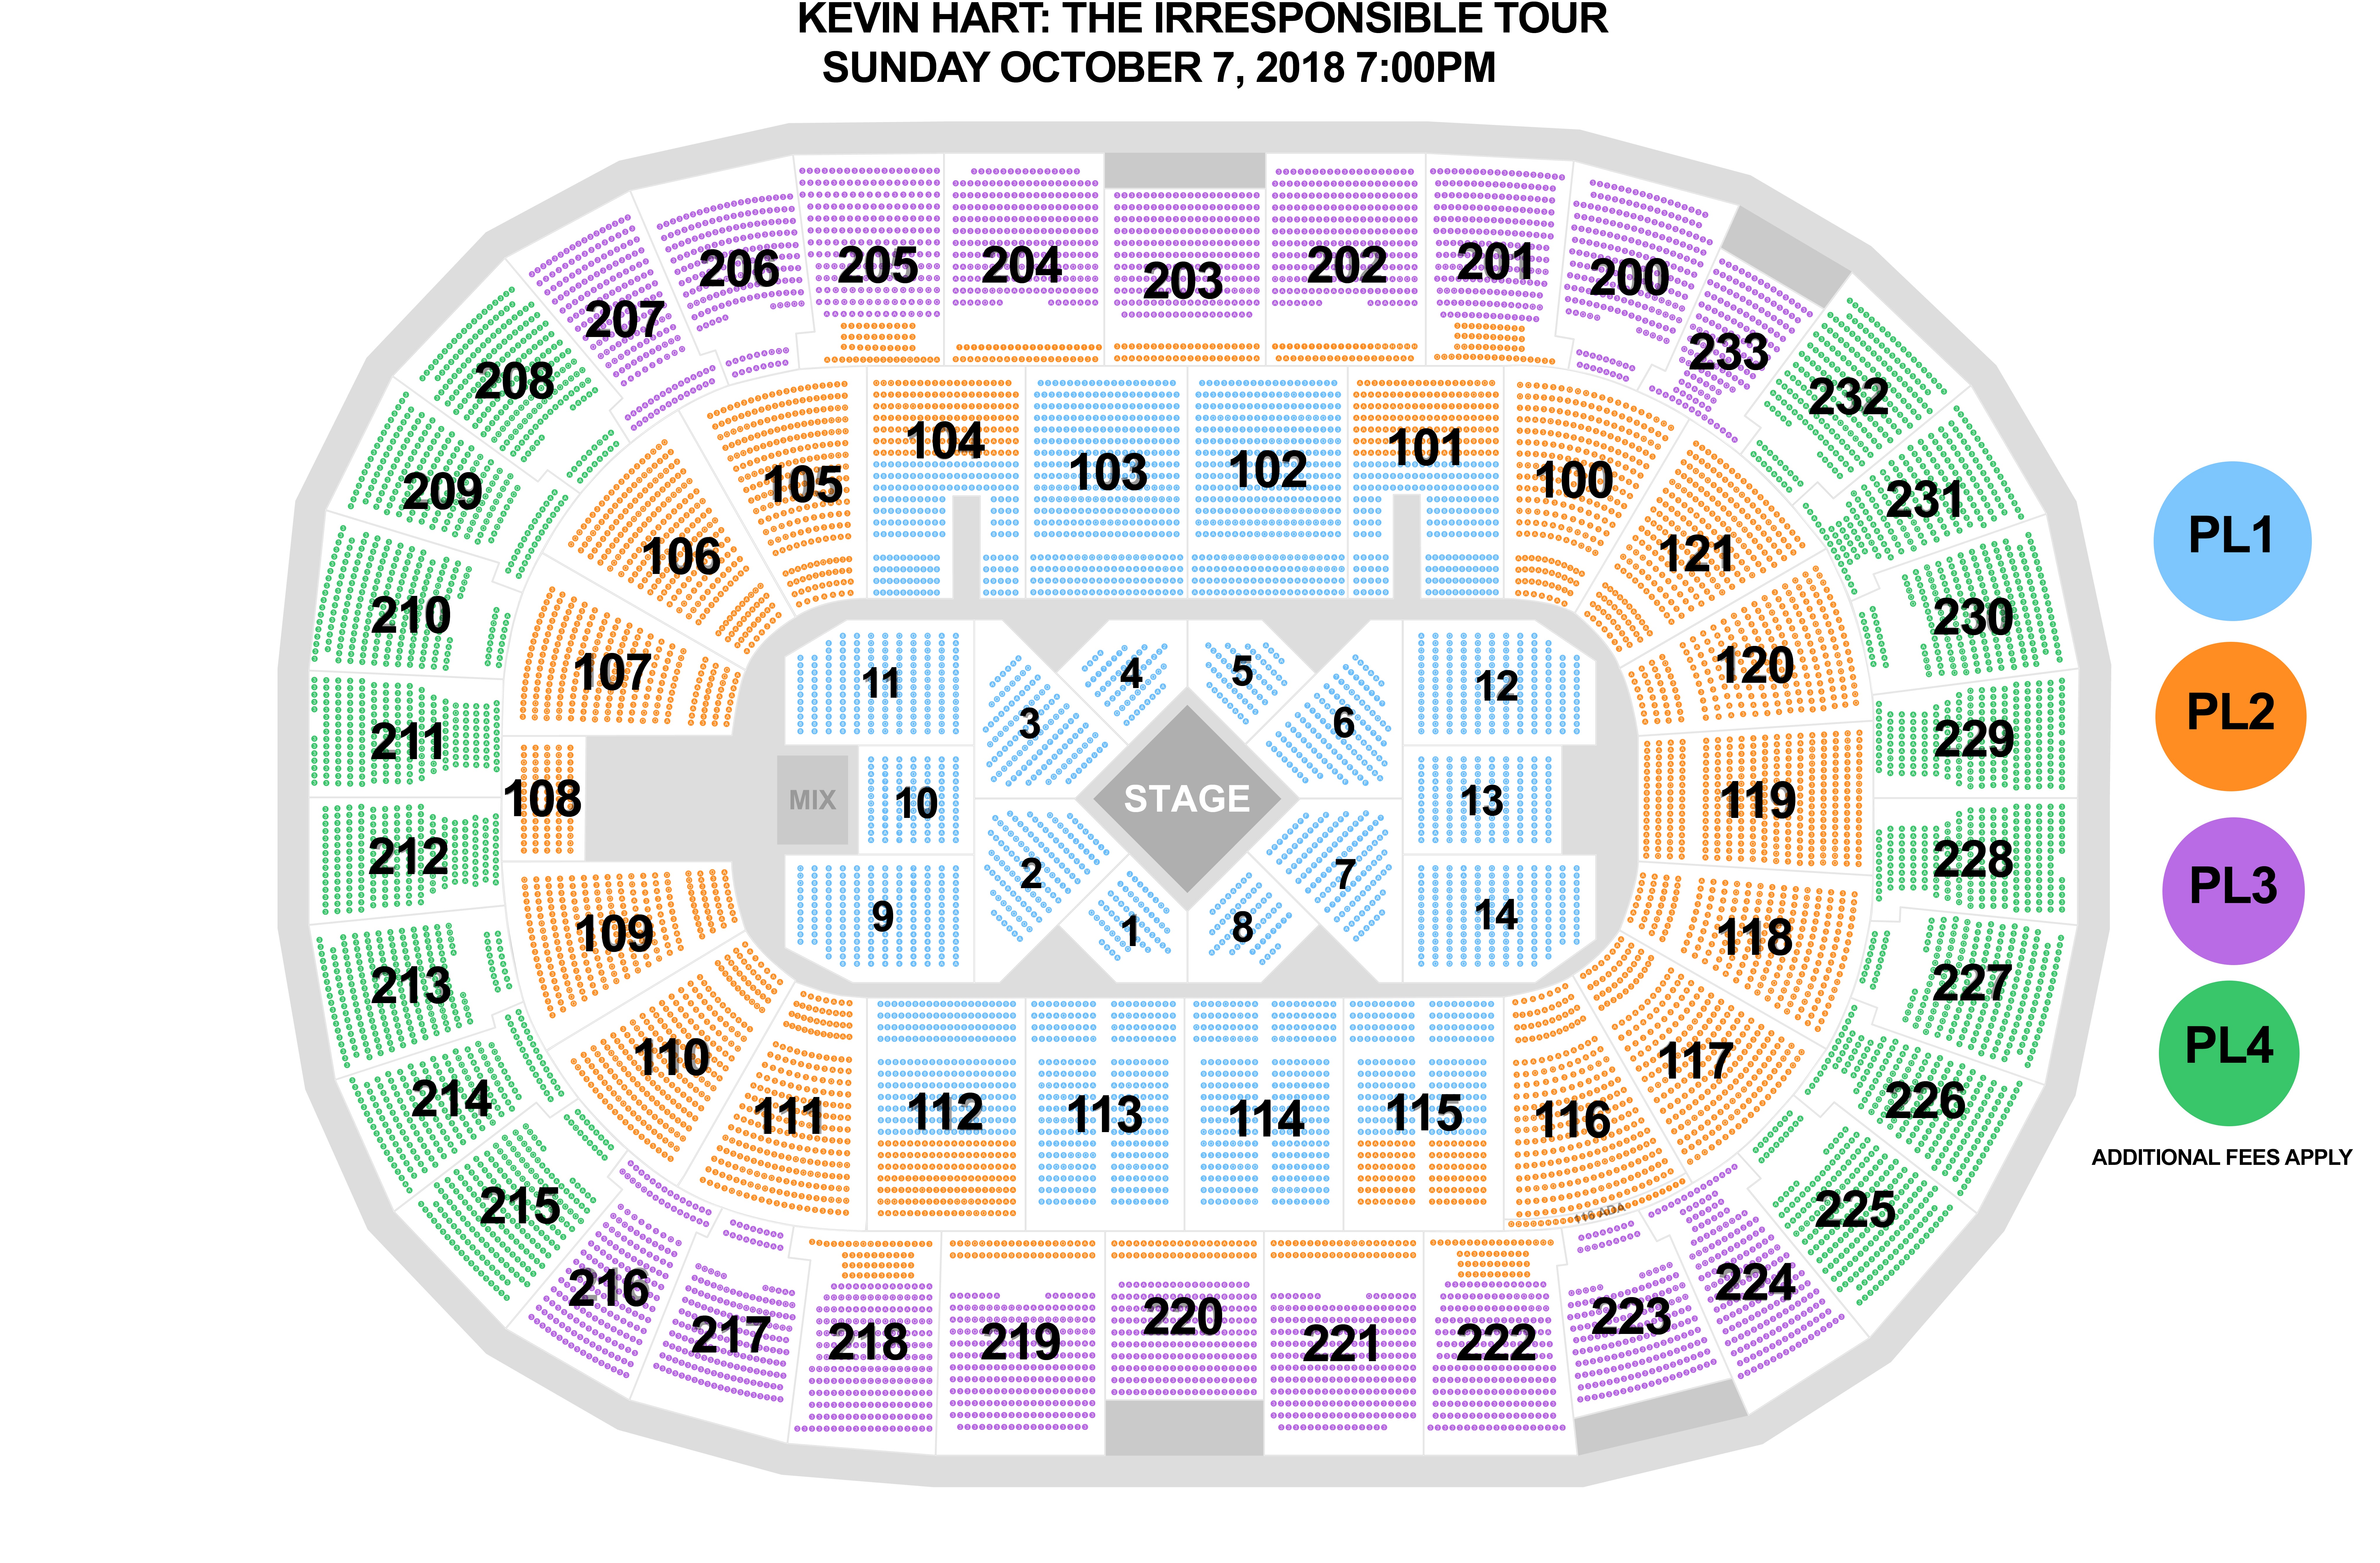 Bon Secours Seating Chart With Rows And Seat Numbers